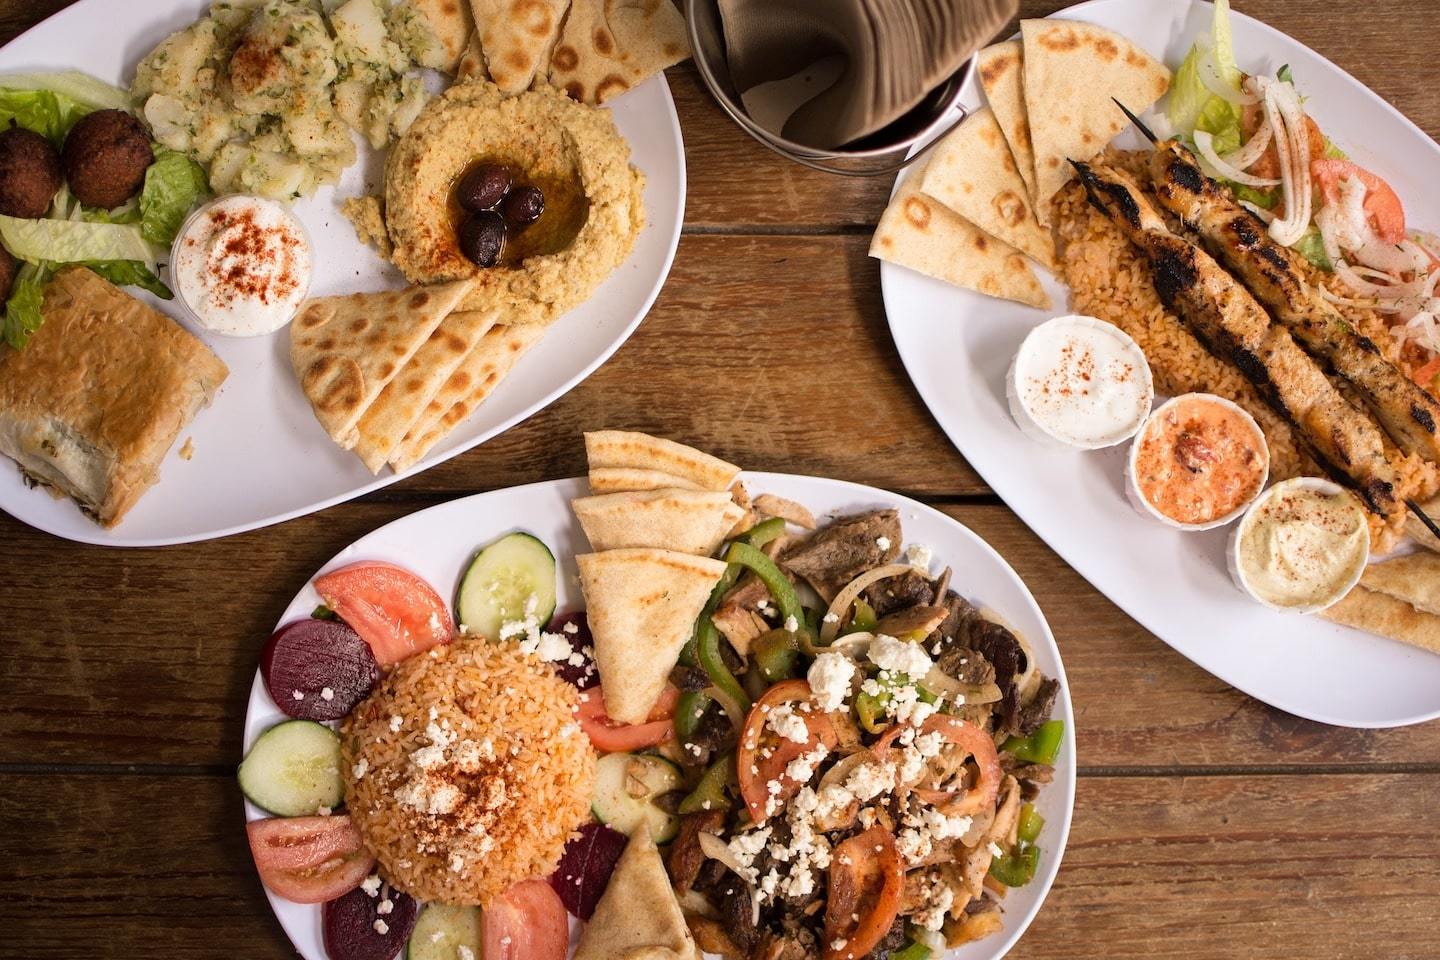 View of three plates full of traditional Greek food